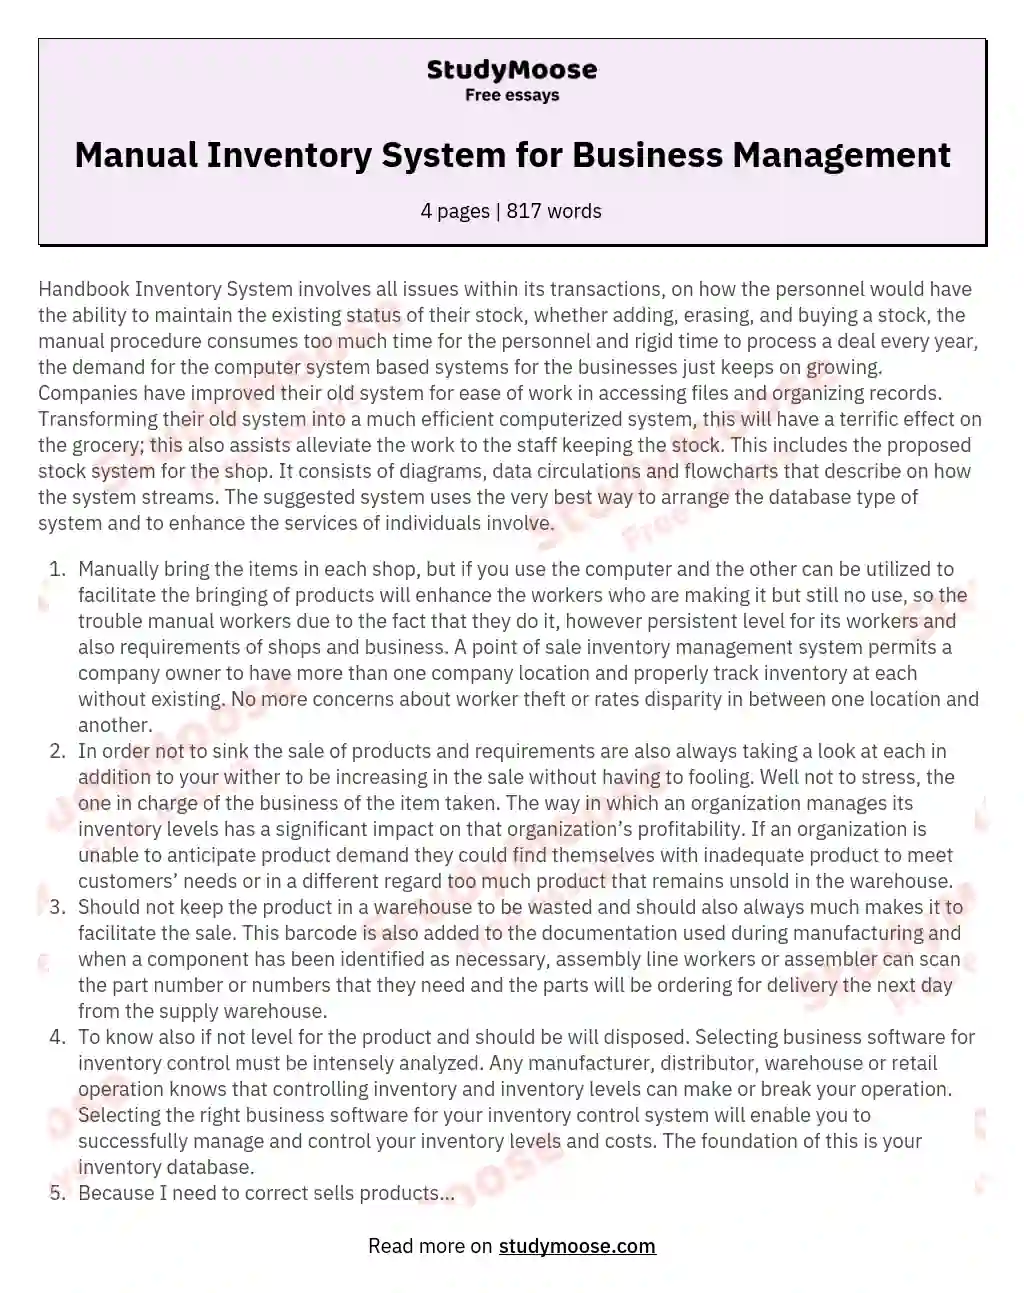 Manual Inventory System for Business Management